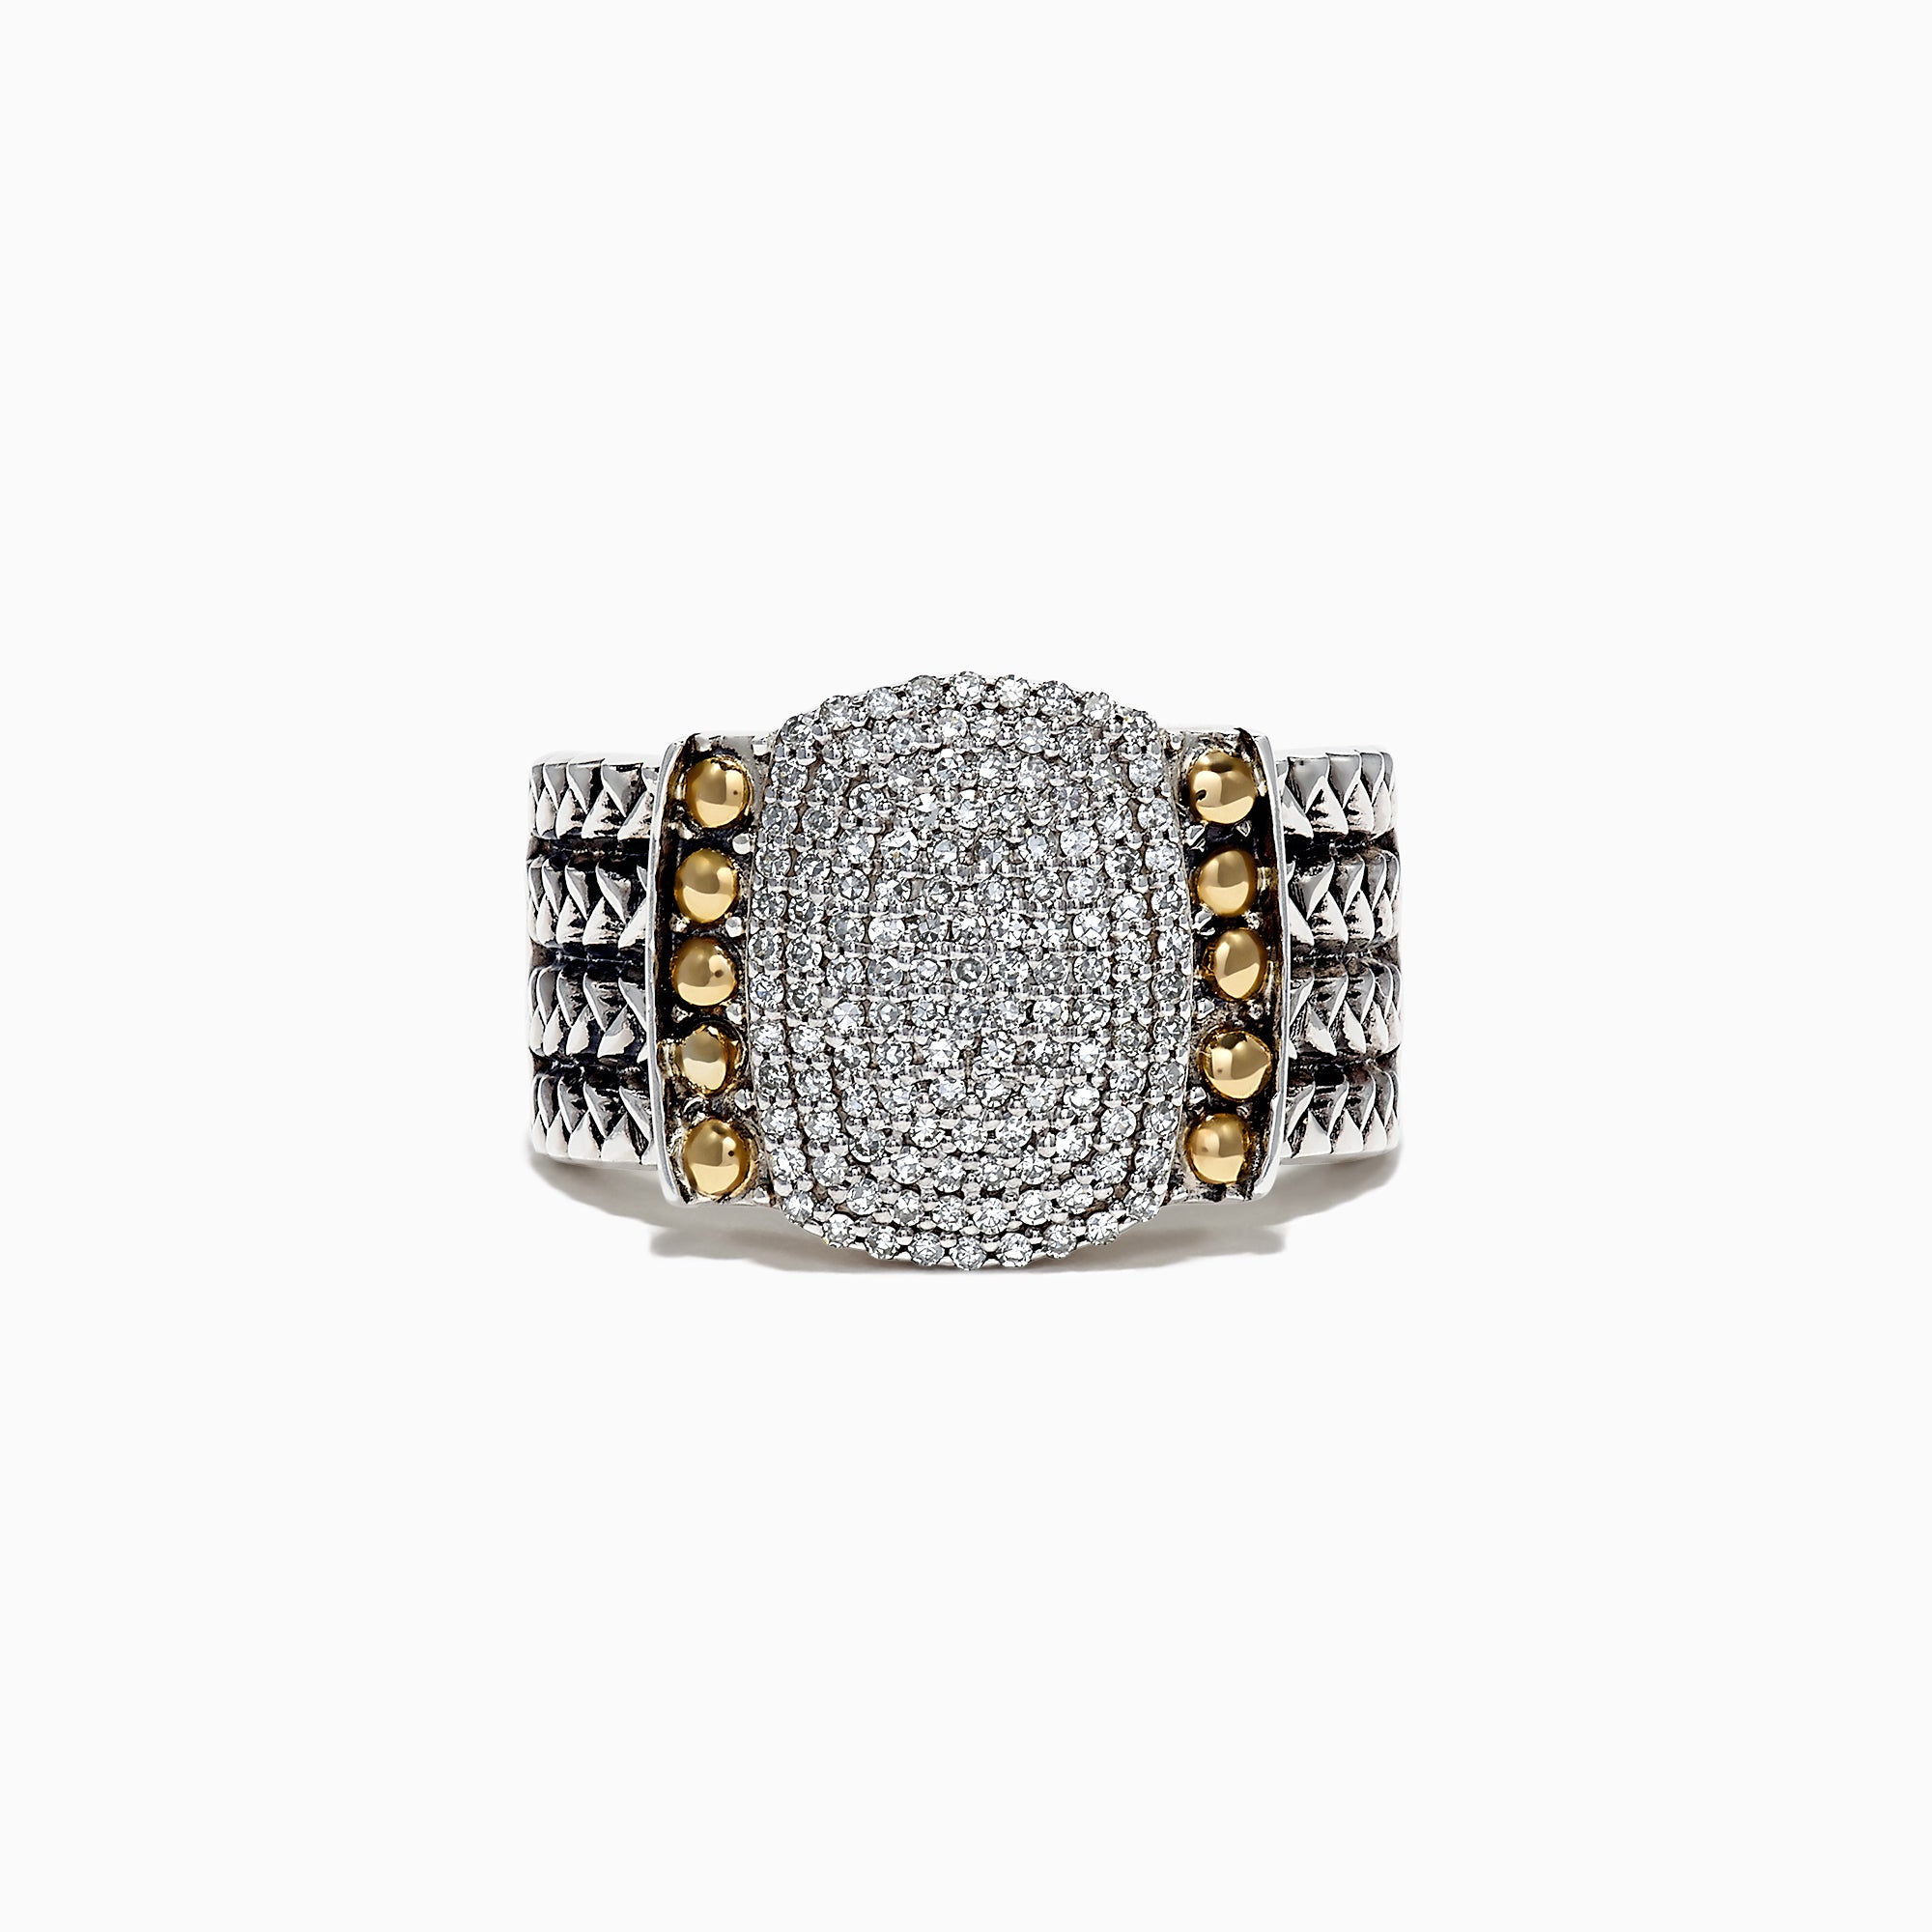 Effy 925 Sterling Silver and 18K Yellow Gold Diamond Ring, 0.39 TCW